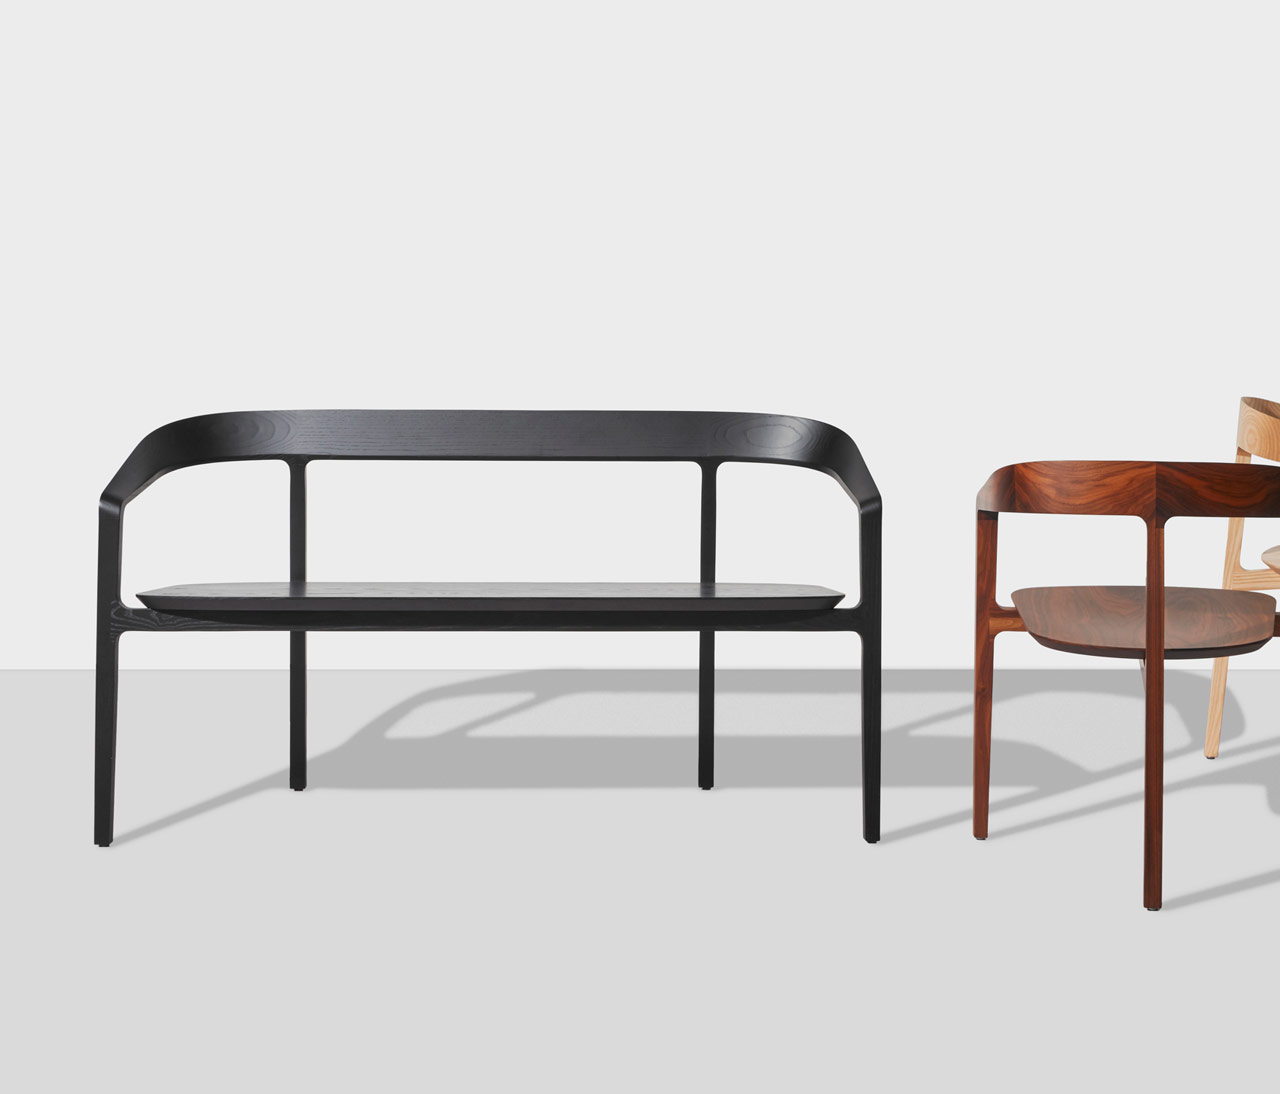 Tom Fereday's DesignByThem Collection Expands with the Bow Bench